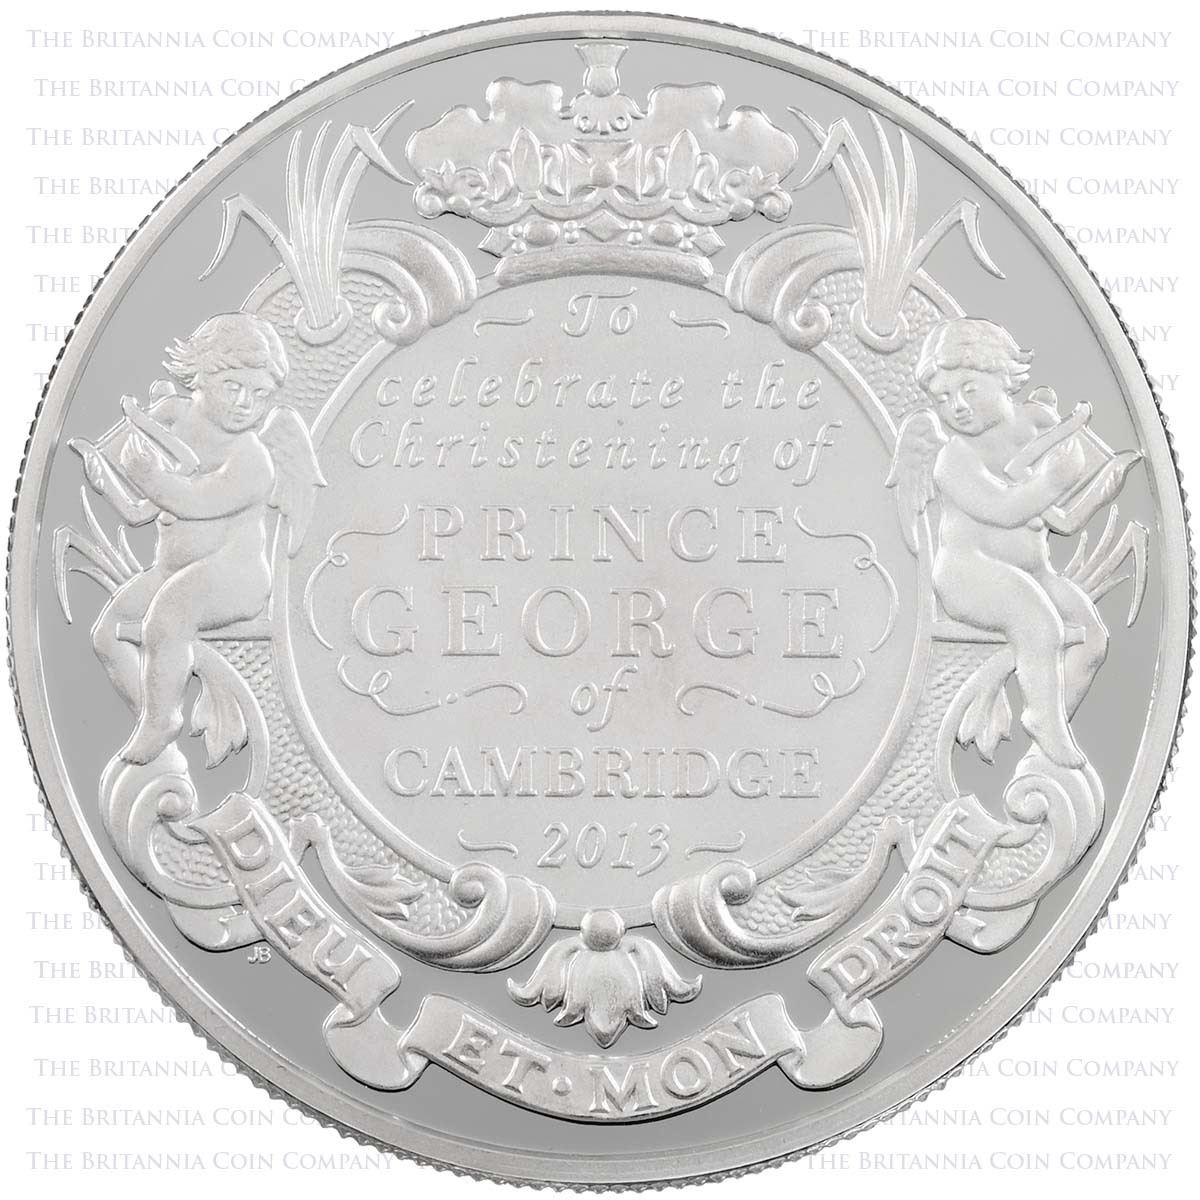 UKGCPF 2013 Prince George Christening Five Pound Crown Piedfort Silver Proof Coin Reverse